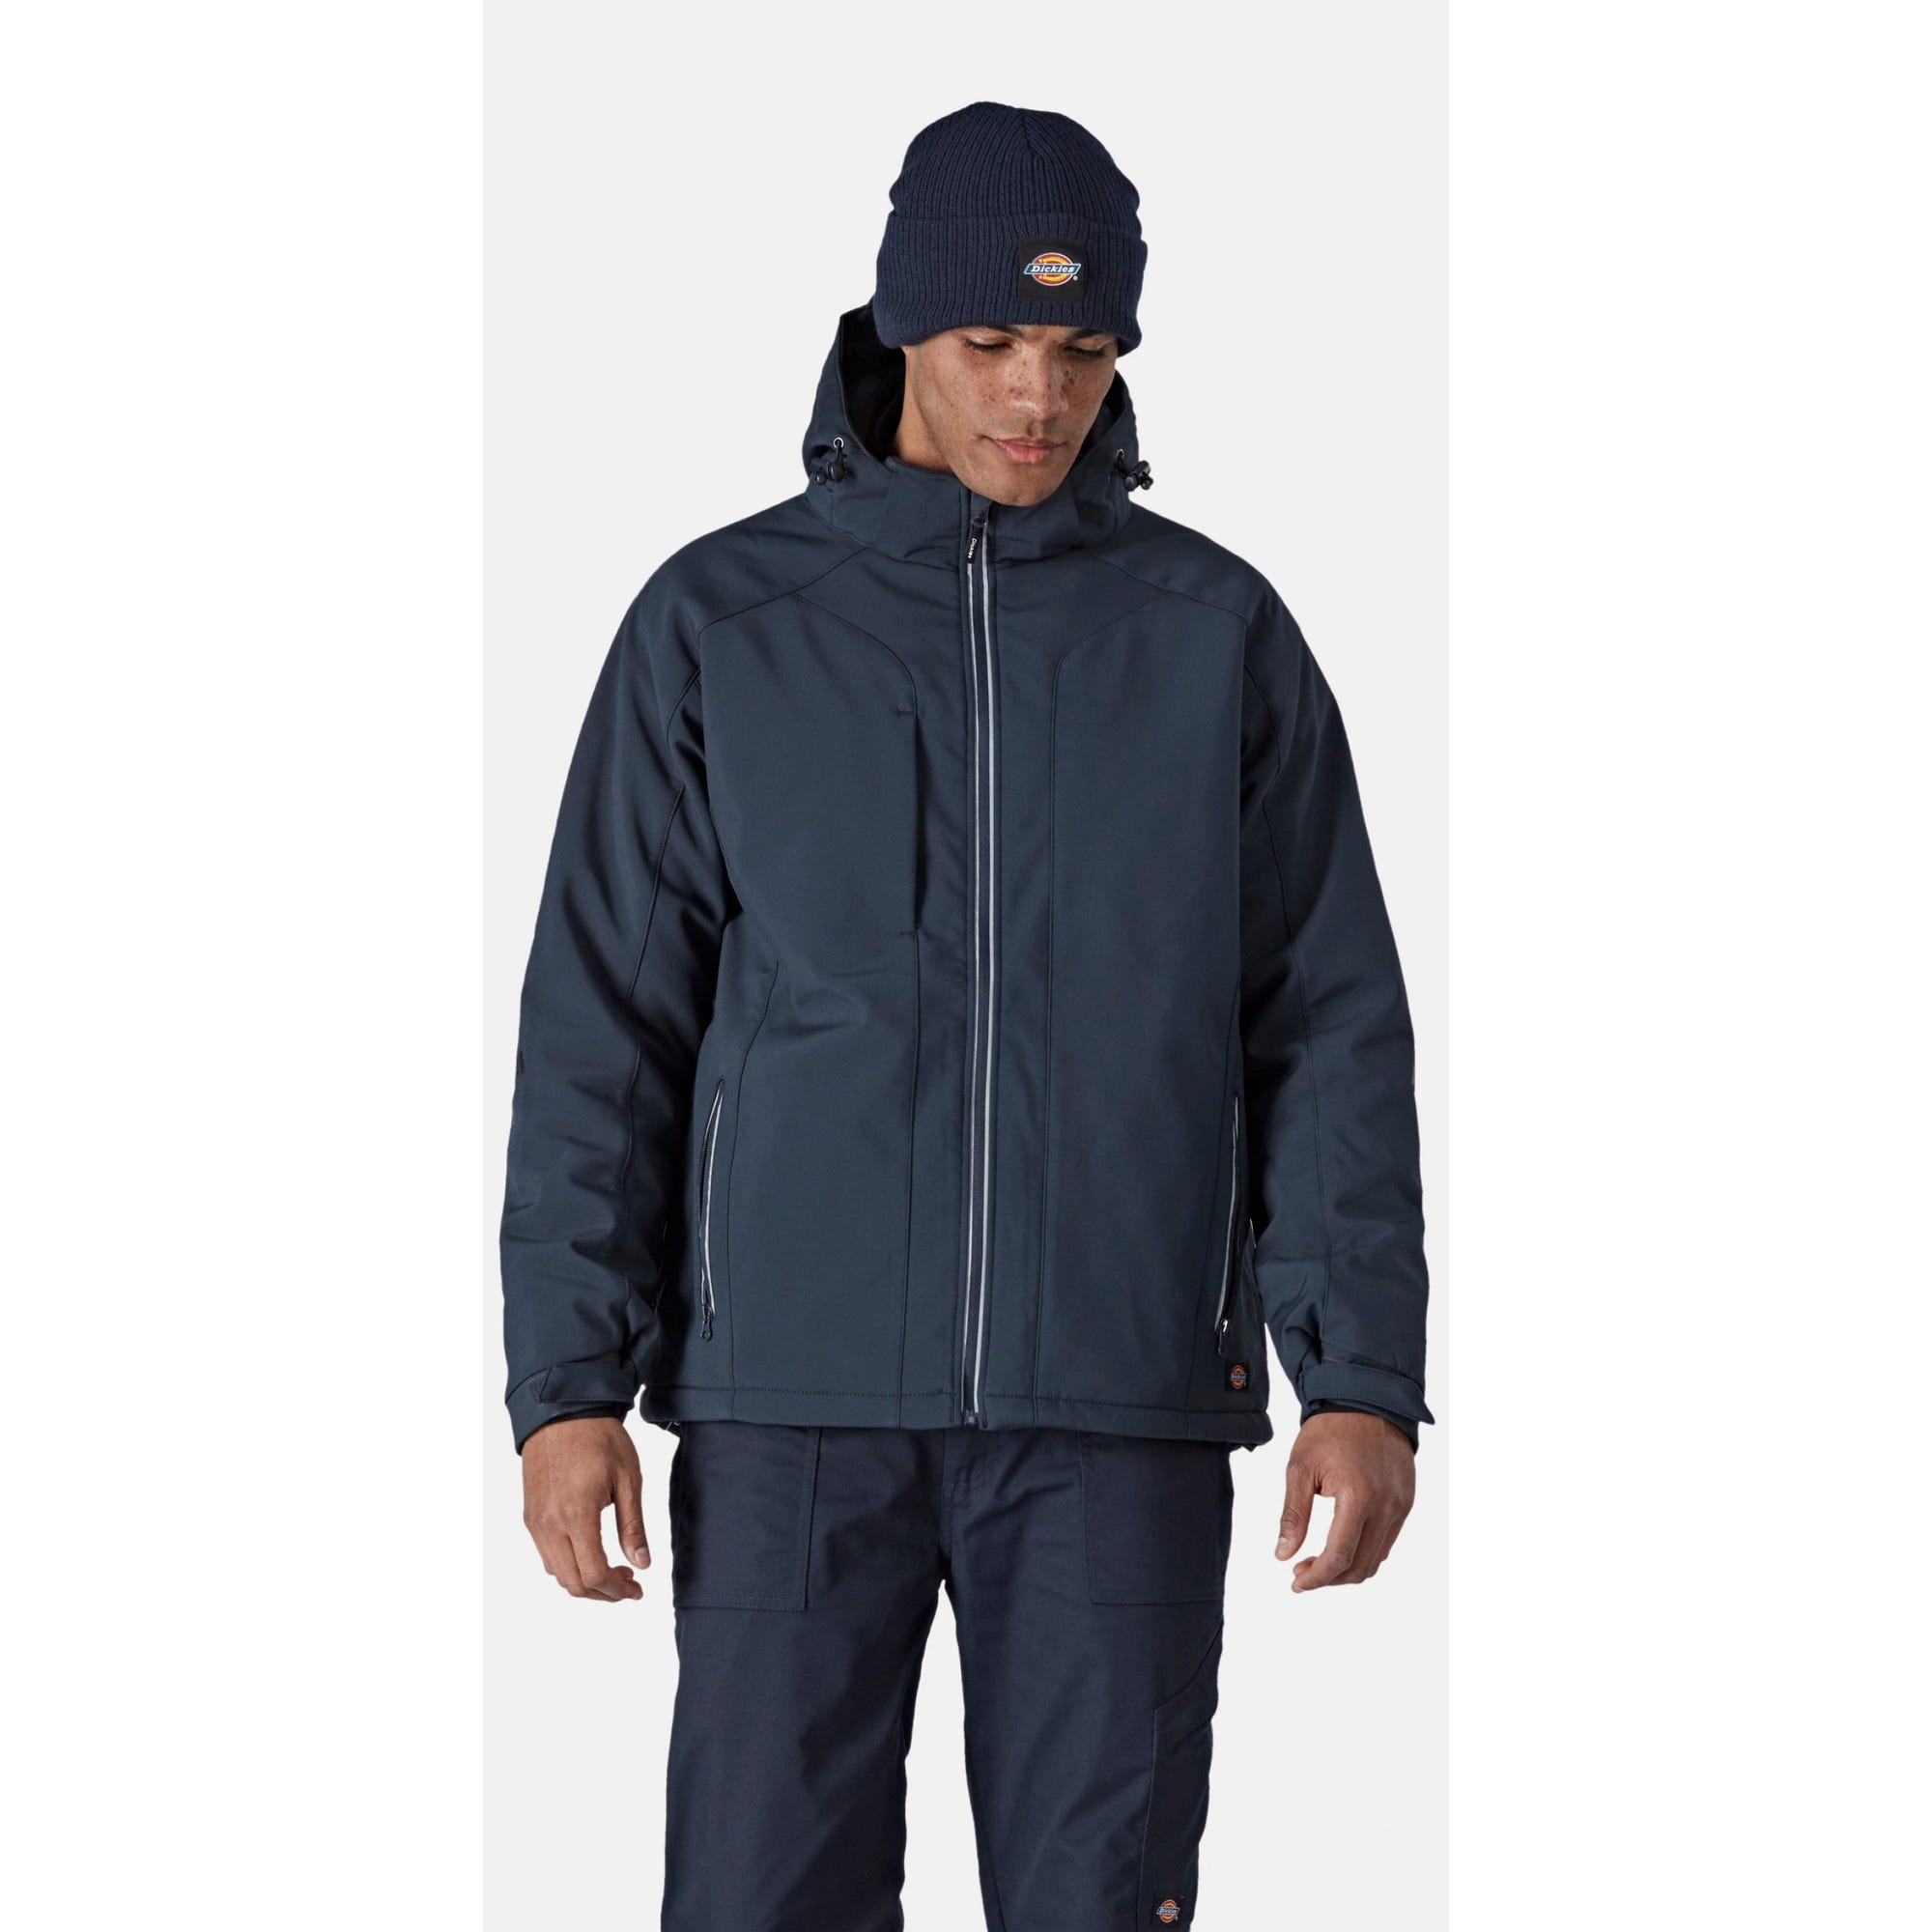 Veste d'Hiver Softshell Bleu marine - Dickies - Taille S 5